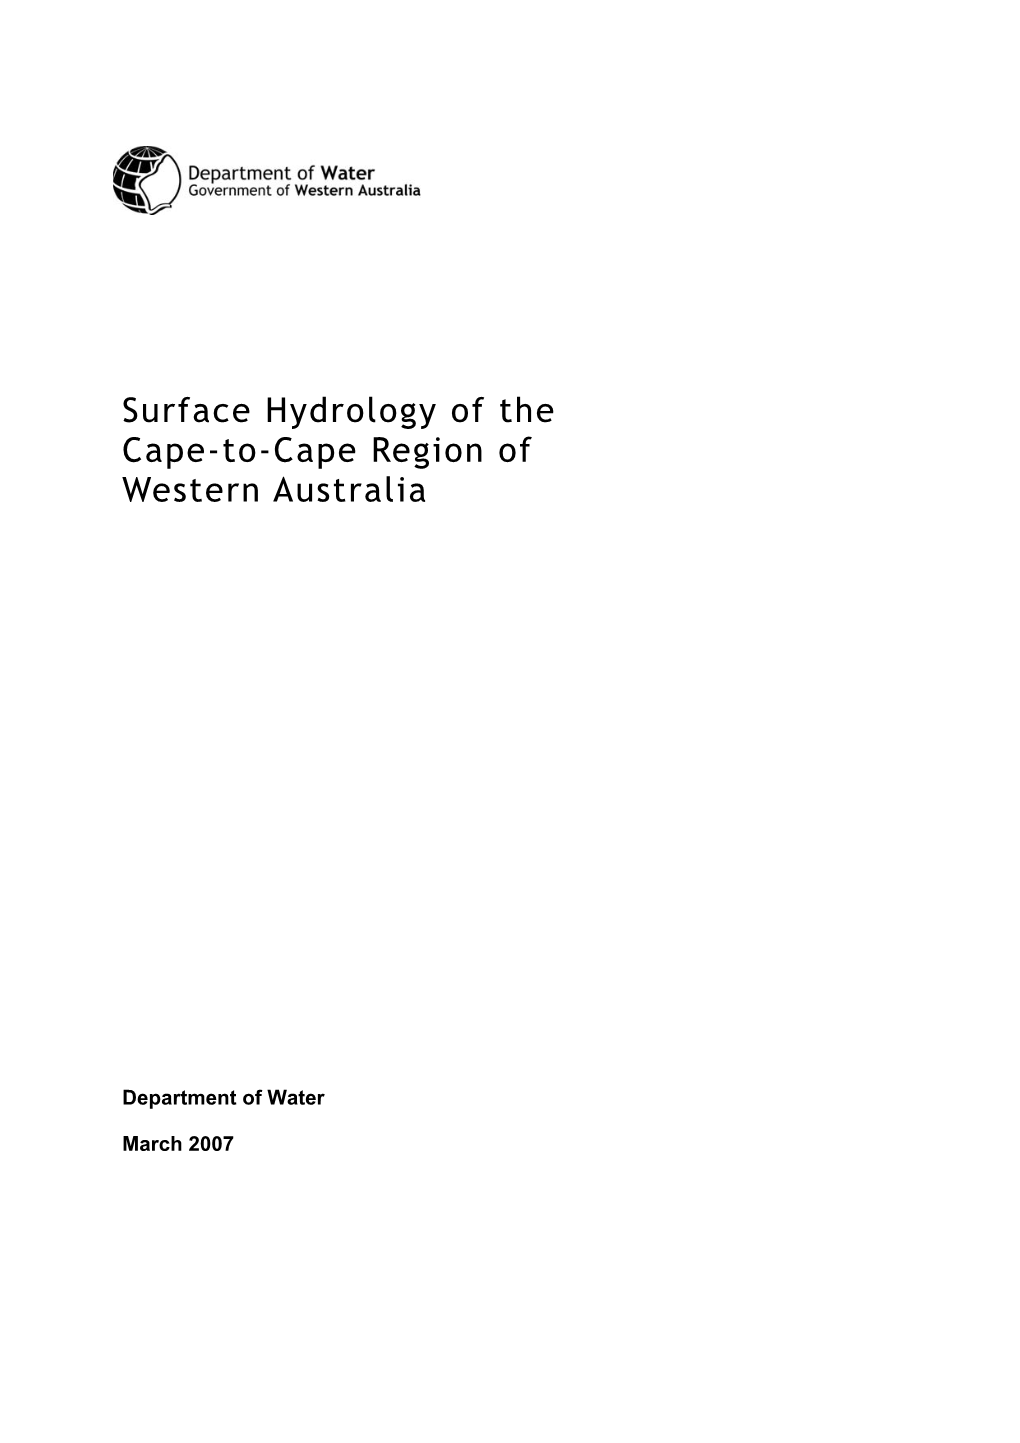 Surface Hydrology of the Cape to Cape Region of WA